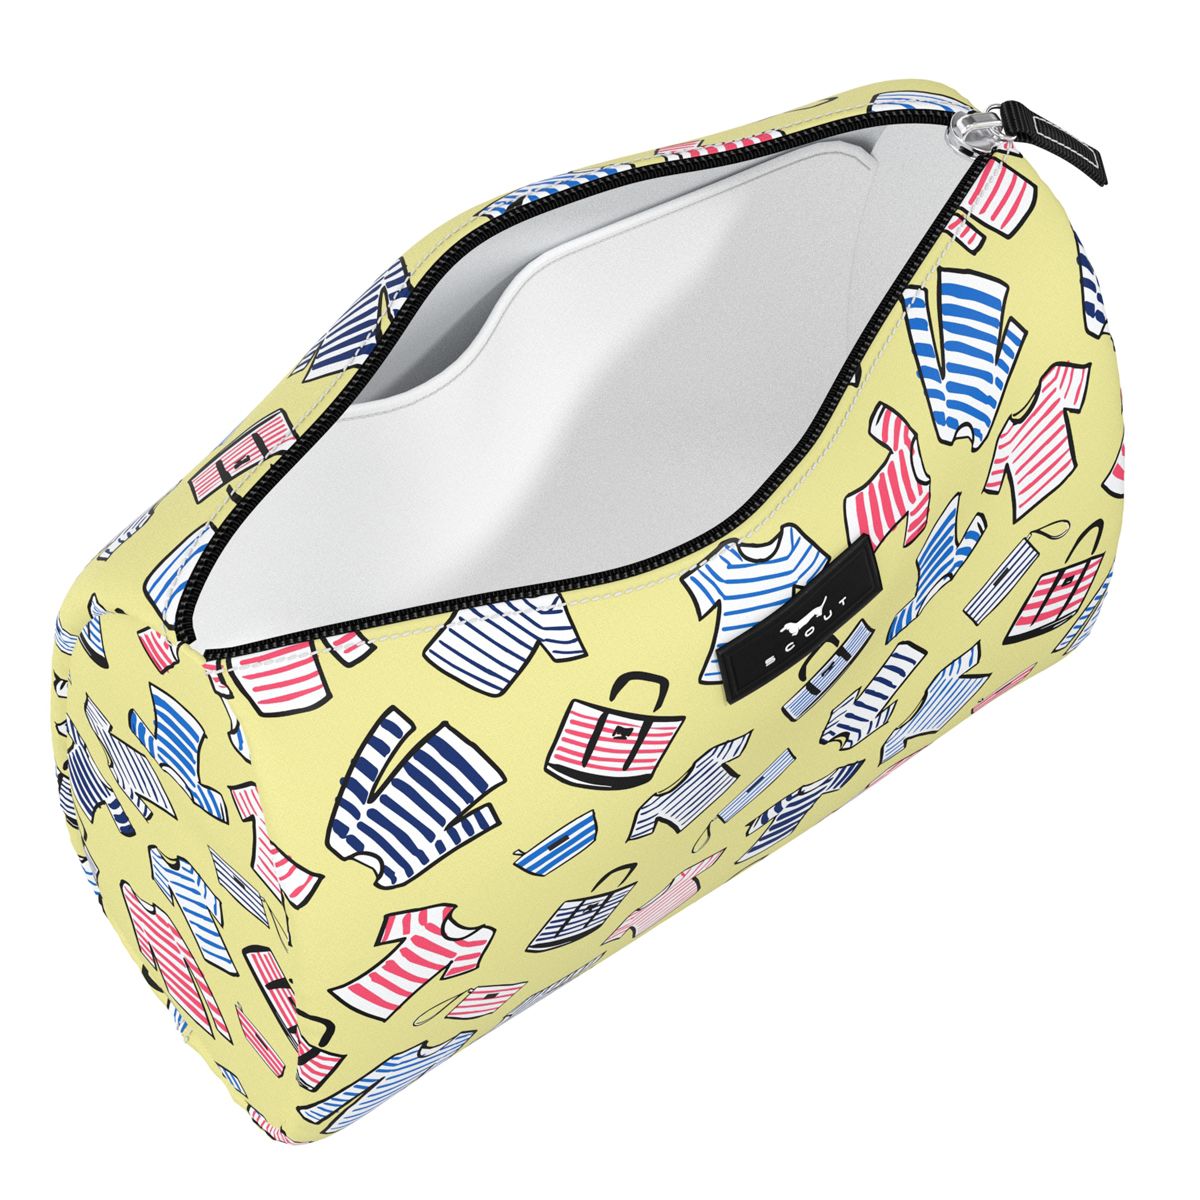 Packin Heat Cosmetic Bag by Scout - In the Stripeline